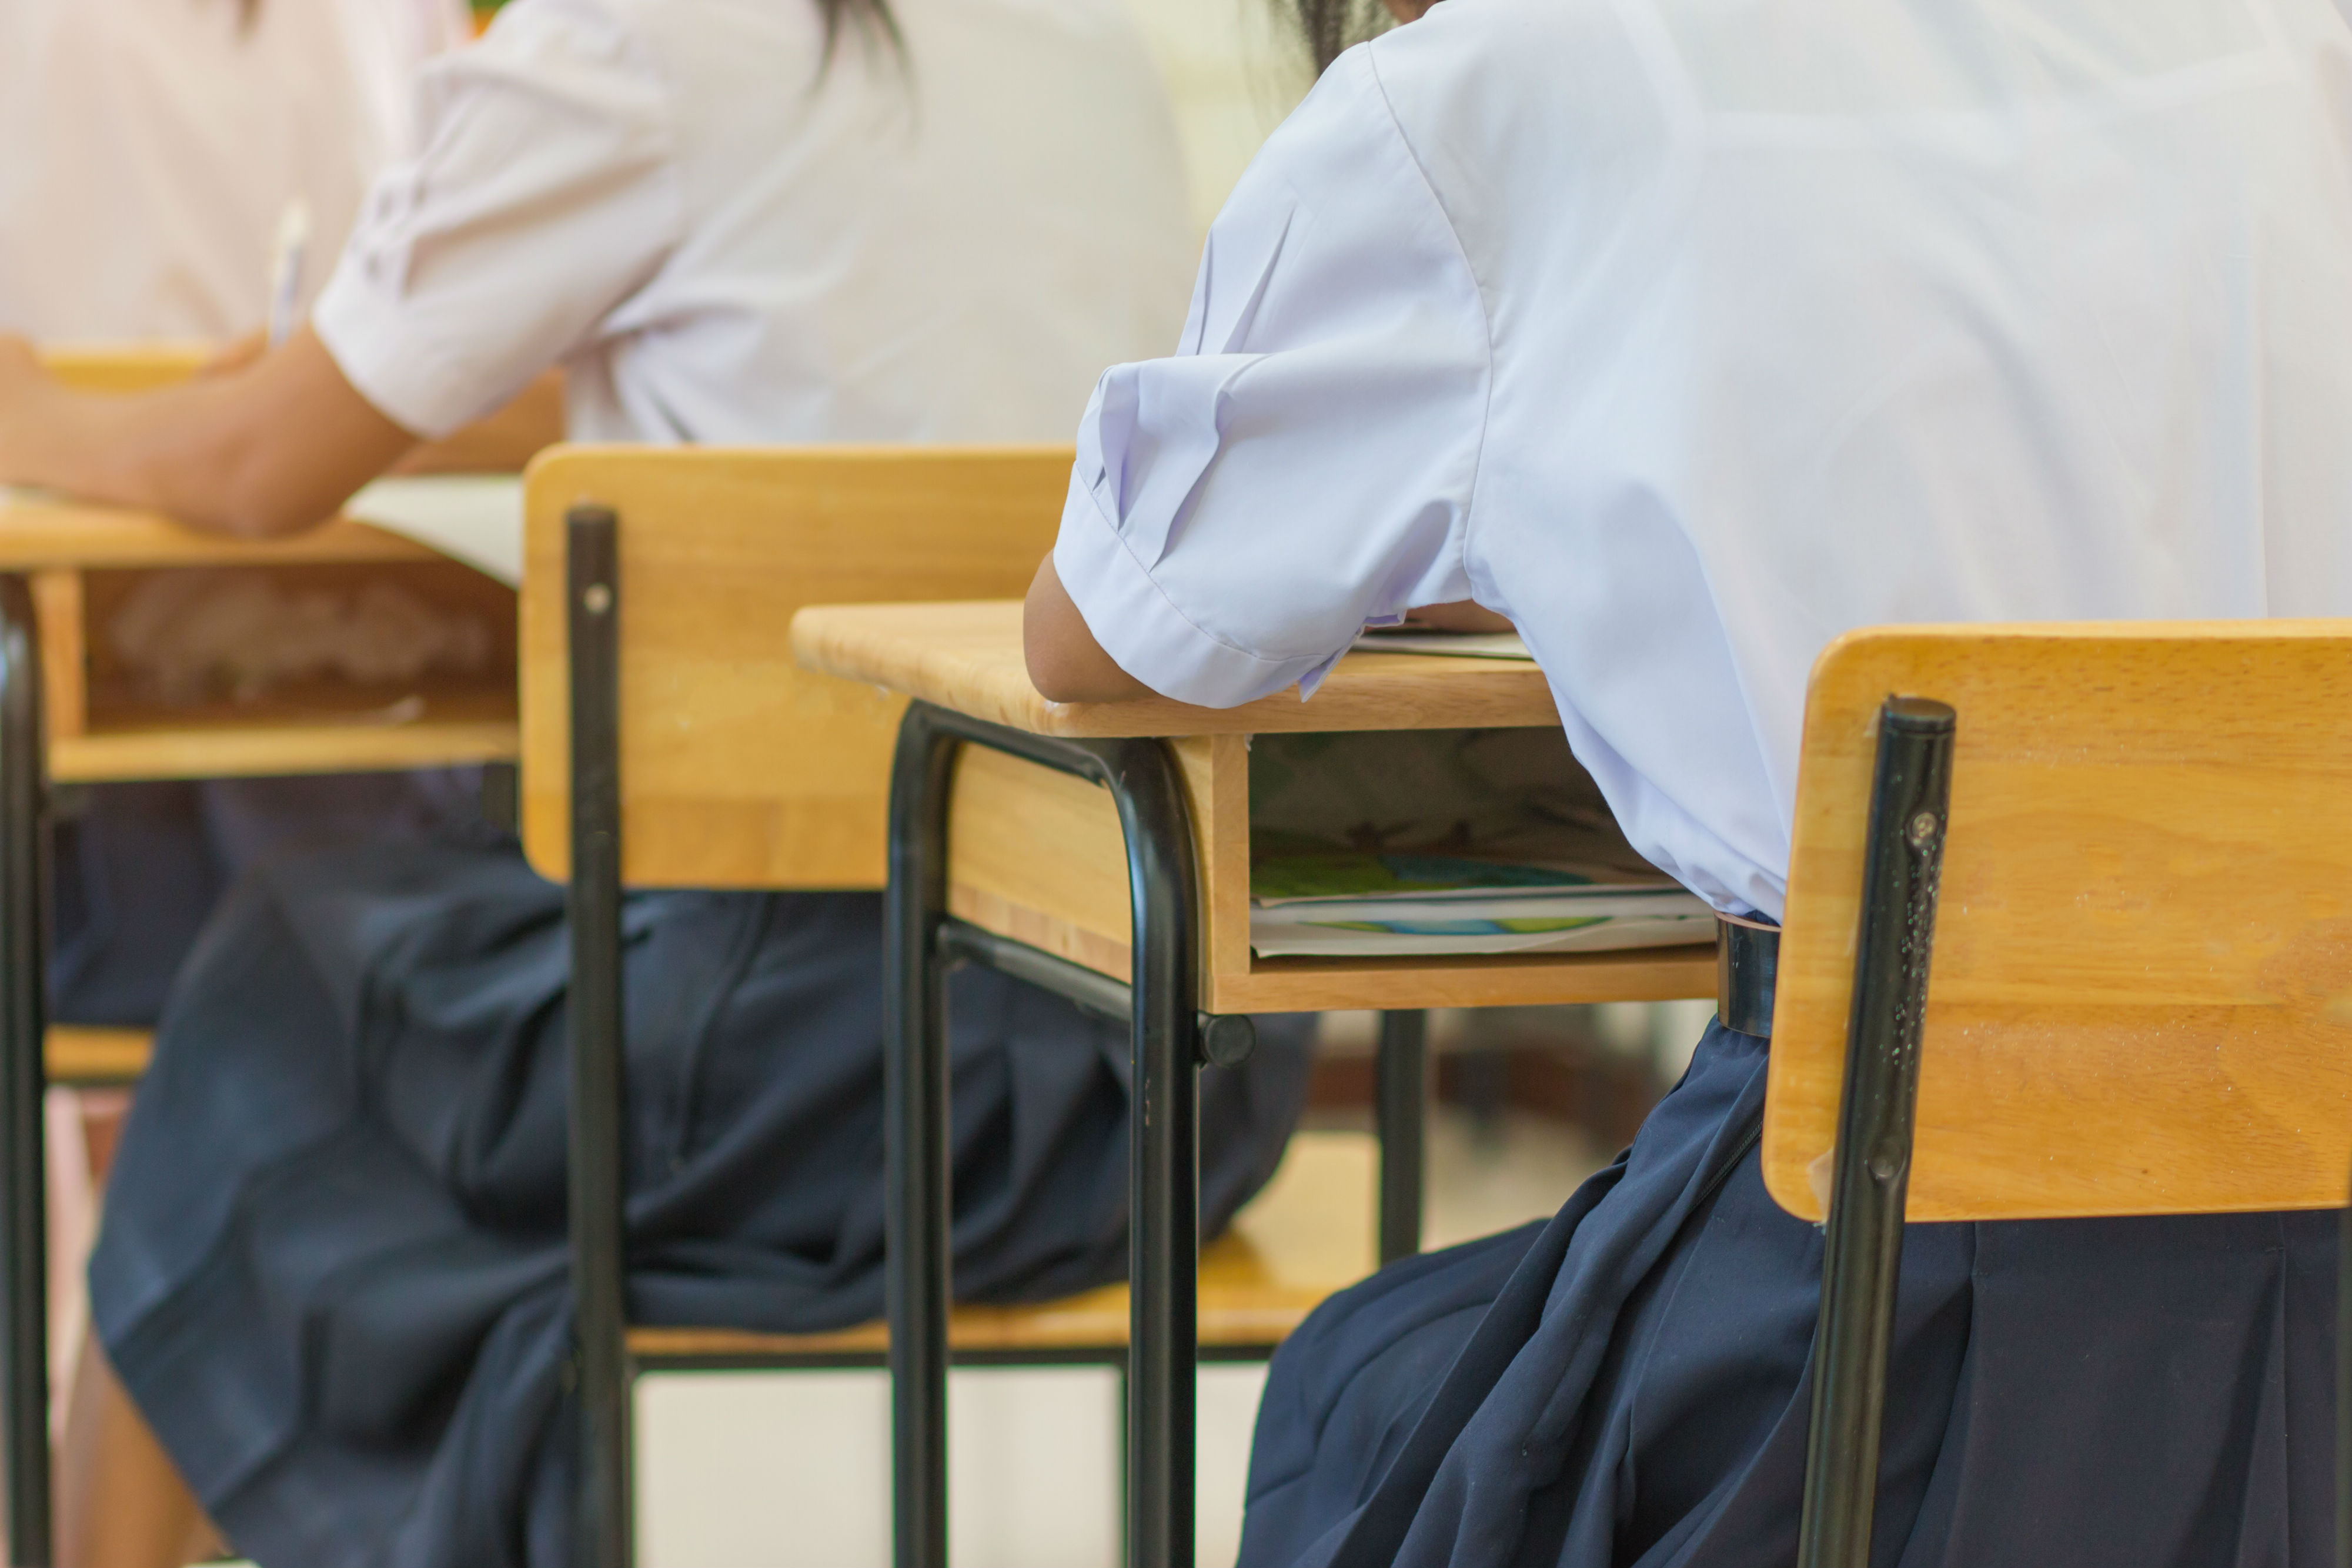  NCEA gaps – a close up image of a students seated in desks.